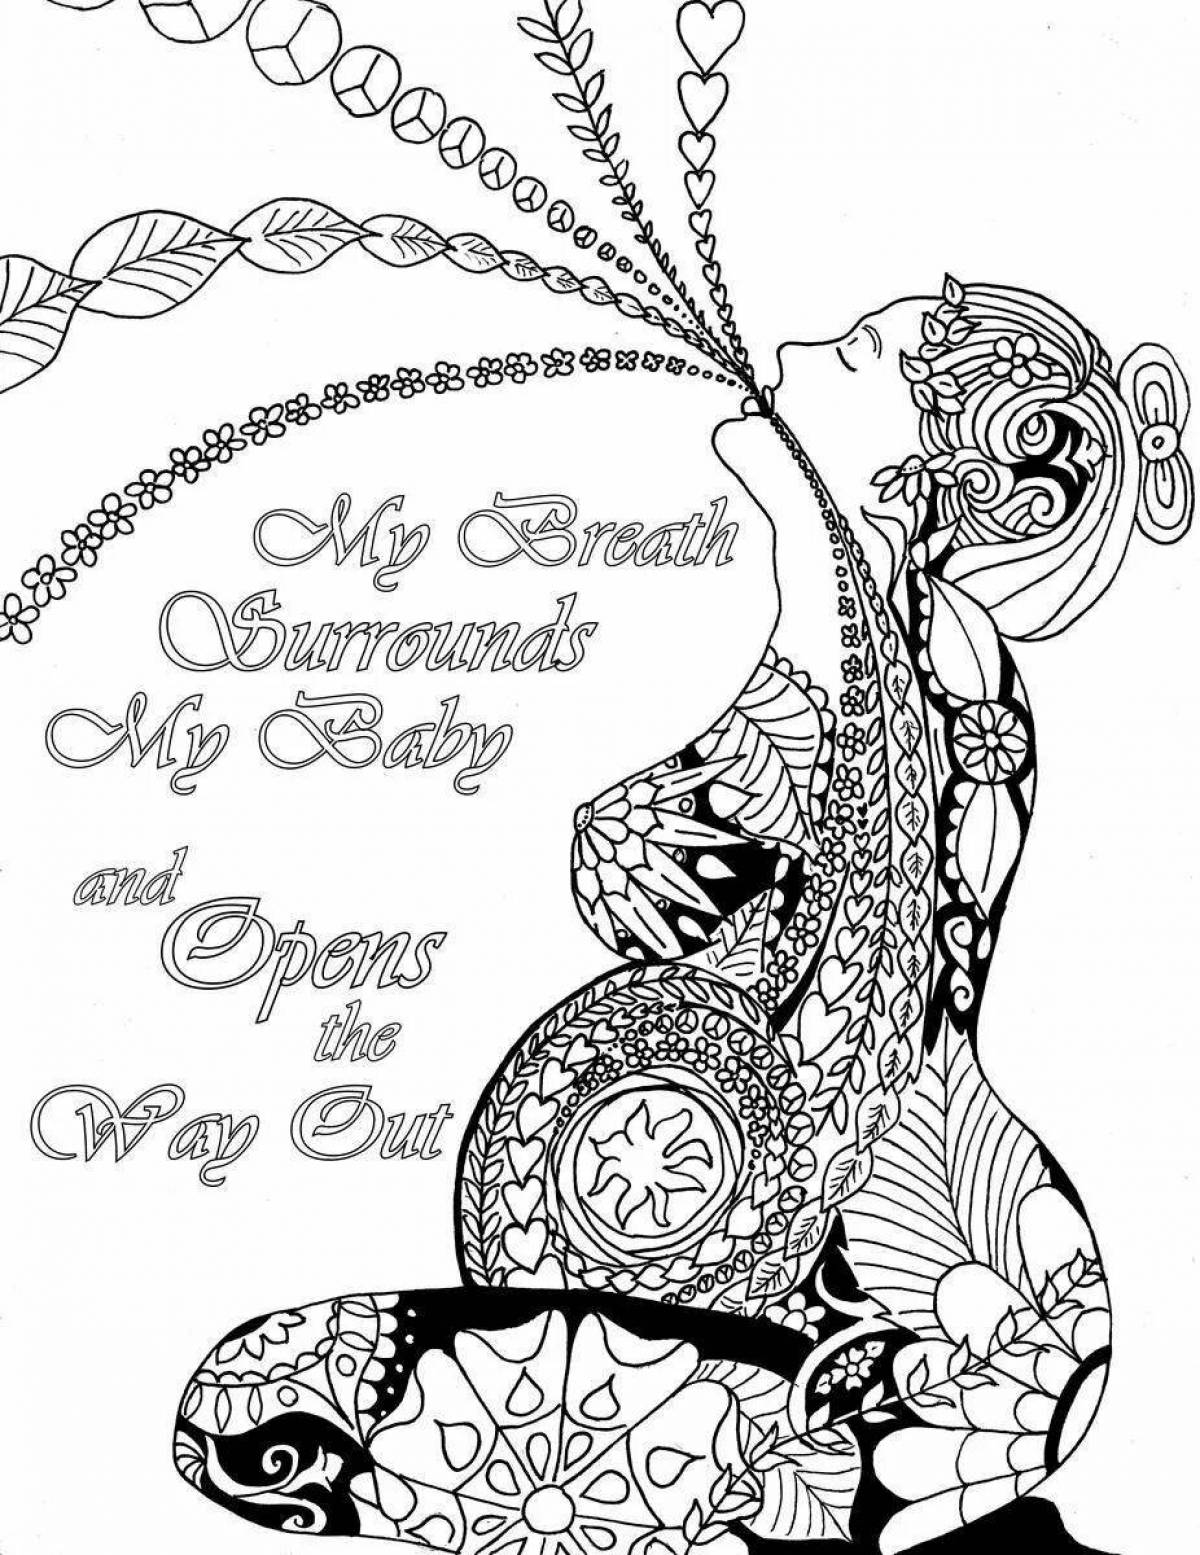 Soothing maternity coloring book